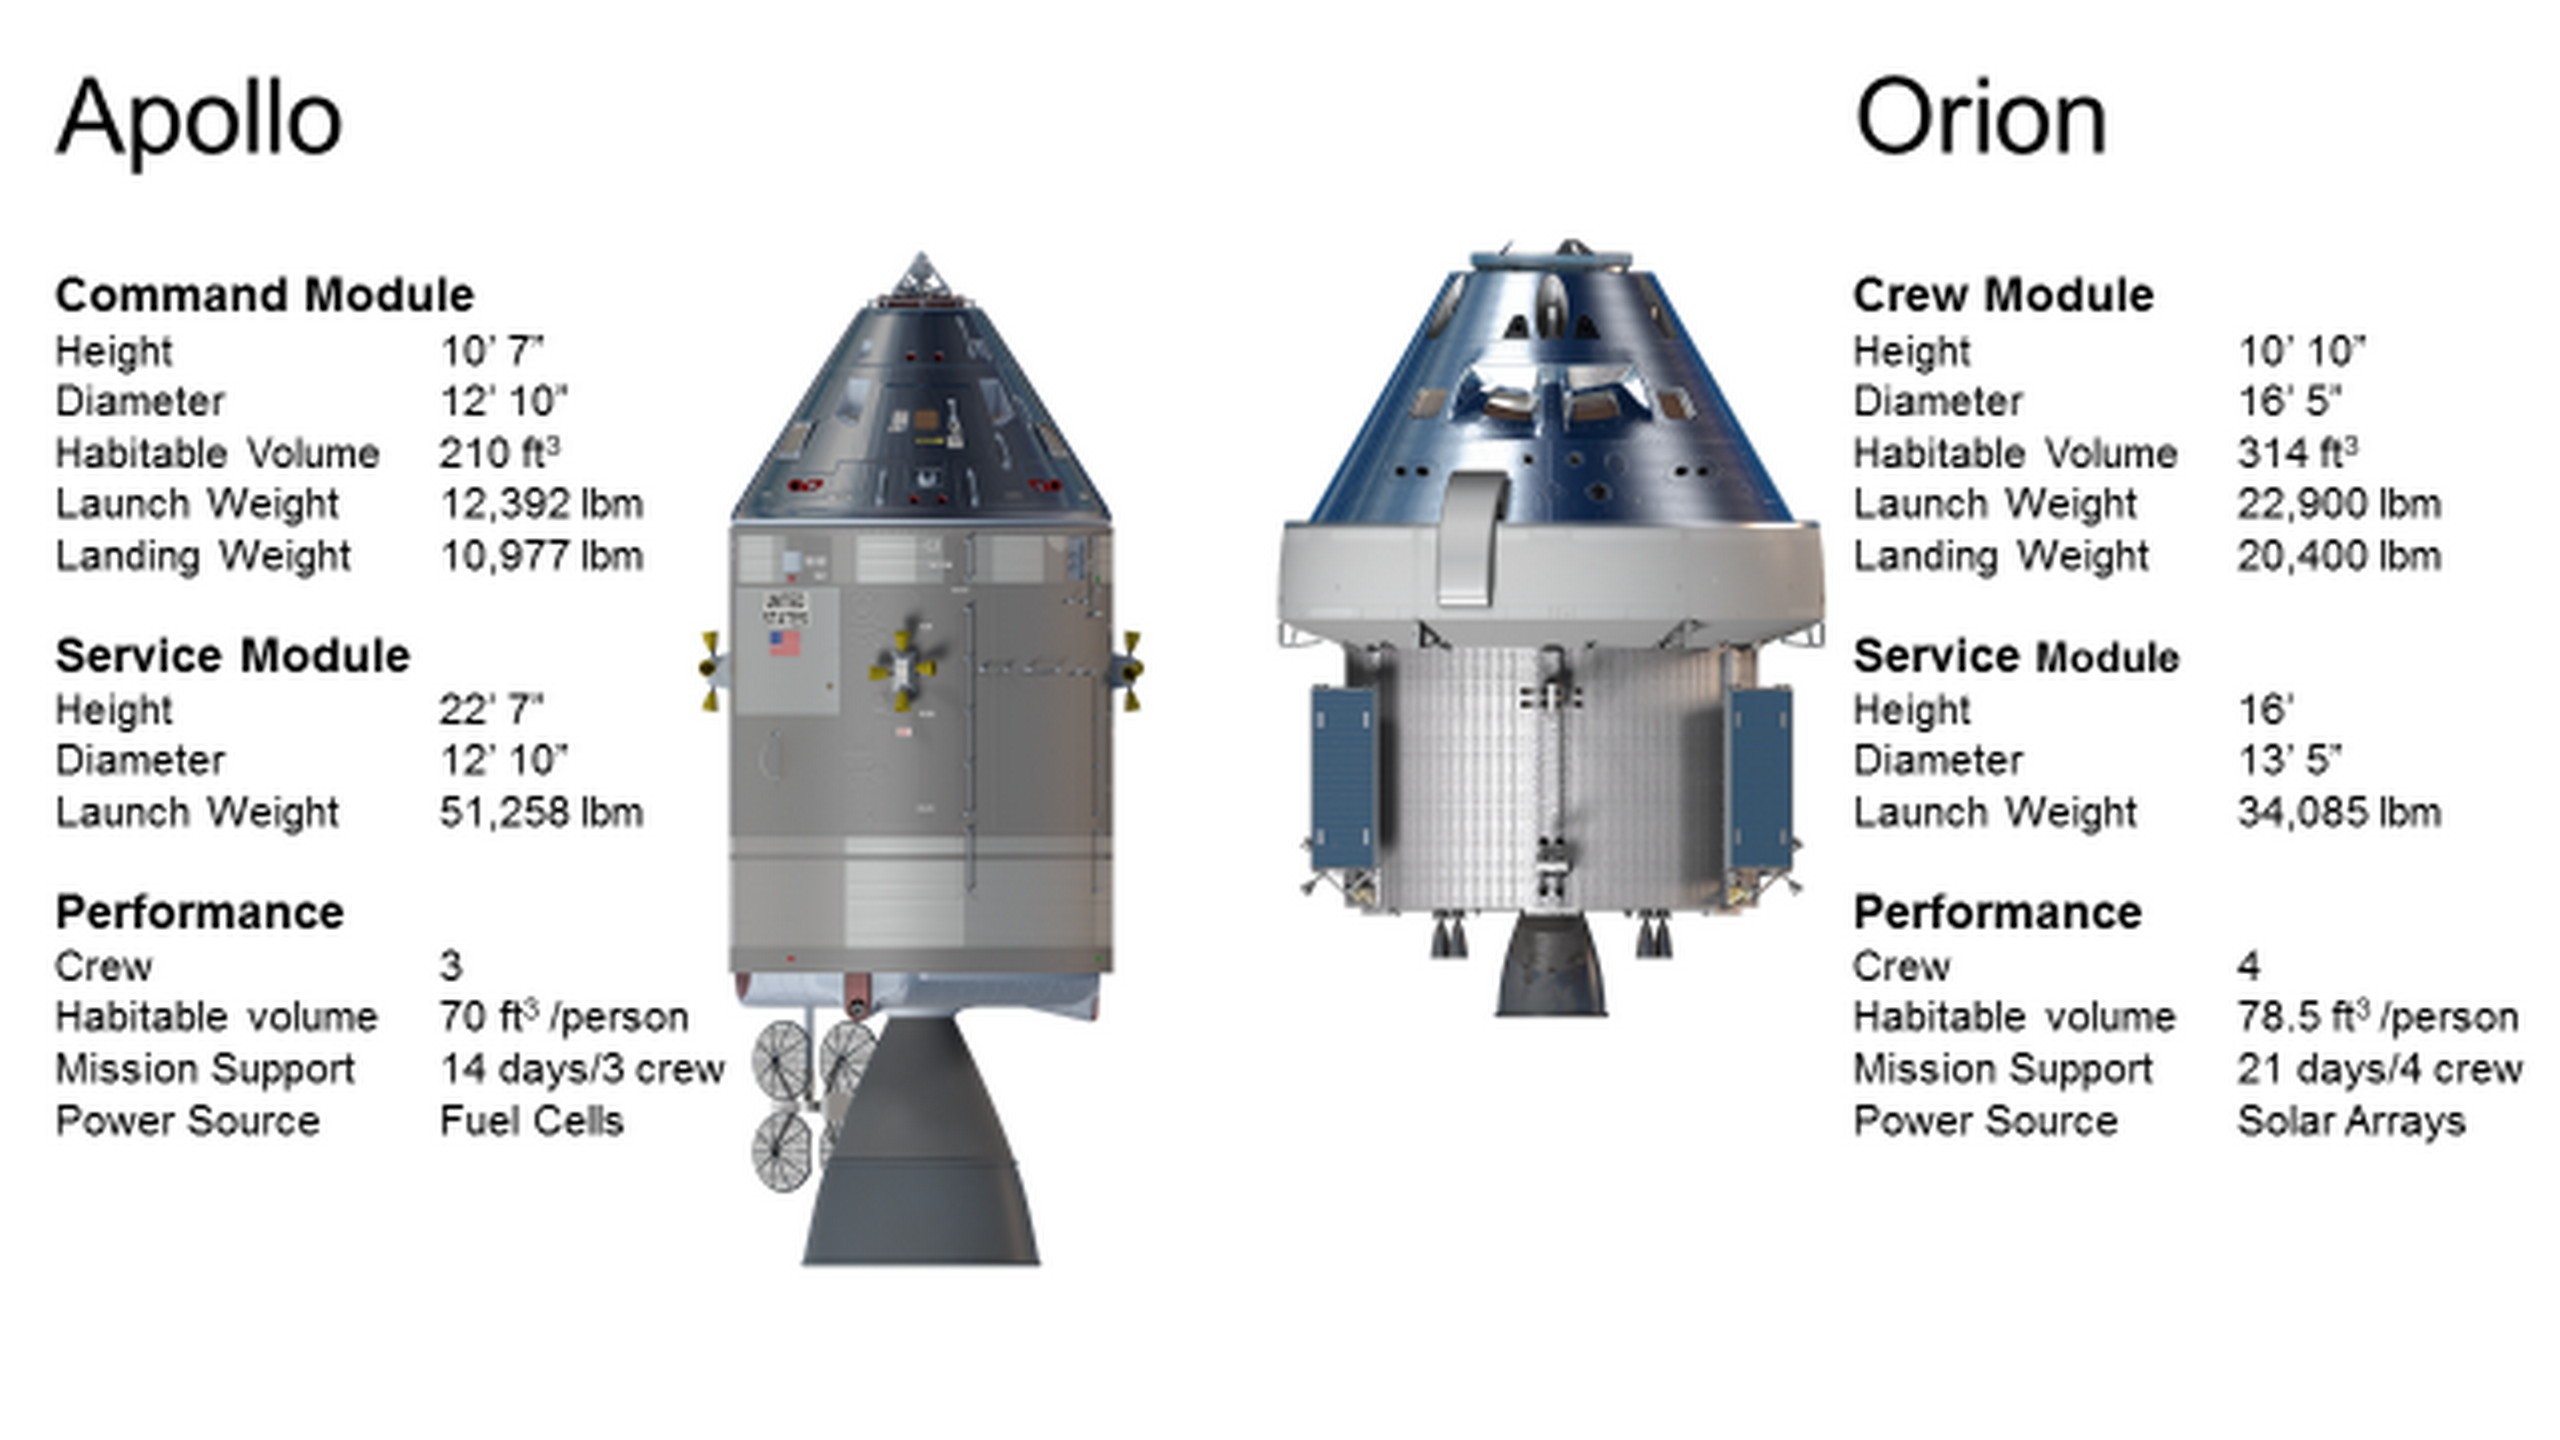 interview-apollo-vs-orion-the-major-differences-explained-by-lockheed-martin-personnel_8.jpg